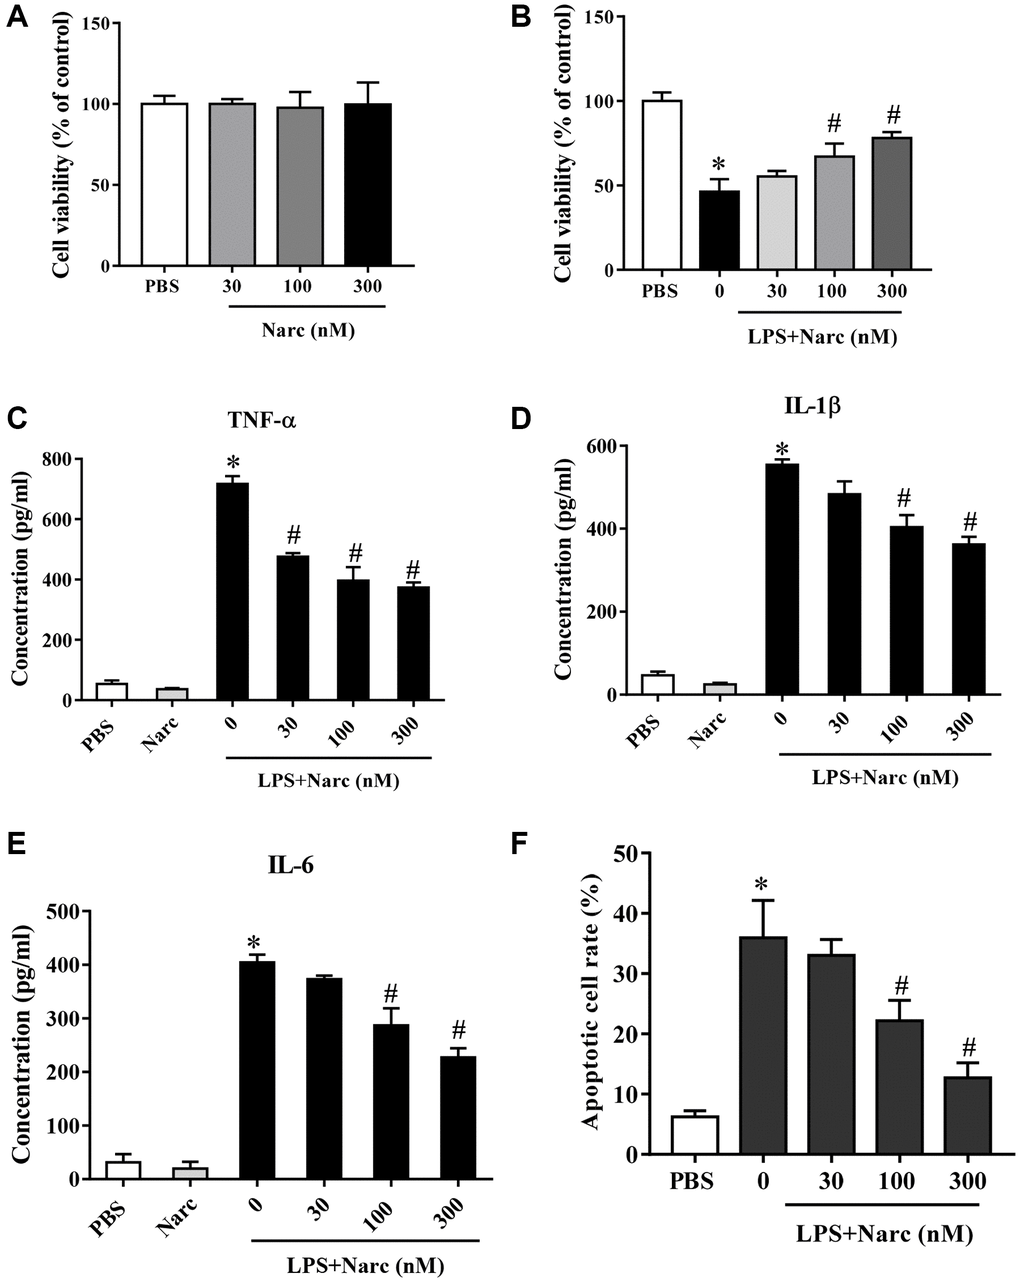 Narciclasine attenuates LPS-induced cardiomyocyte inflammation. (A) The viability of cardiomyocytes treated with different concentrations of narciclasine (0, 30, 100, and 300 nM) was measured by CCK8 assays. (B) The viability of cardiomyocytes stimulated with LPS and treated with different concentrations of narciclasine (0, 30, 100, and 300 nM) was measured by CCK8 assays. (C–E) The concentration of inflammatory cytokines (TNF-α, IL-1β, and IL-6) in cardiomyocytes stimulated with LPS and treated with different concentrations of narciclasine (0, 30, 100, and 300 nM) was measured by ELISA kits. (F) Quantification of LPS-induced neonatal rat cardiomyocyte apoptosis was analyzed by FACS. n = 3 per group. Data represent the mean ± SEM. *P #P 